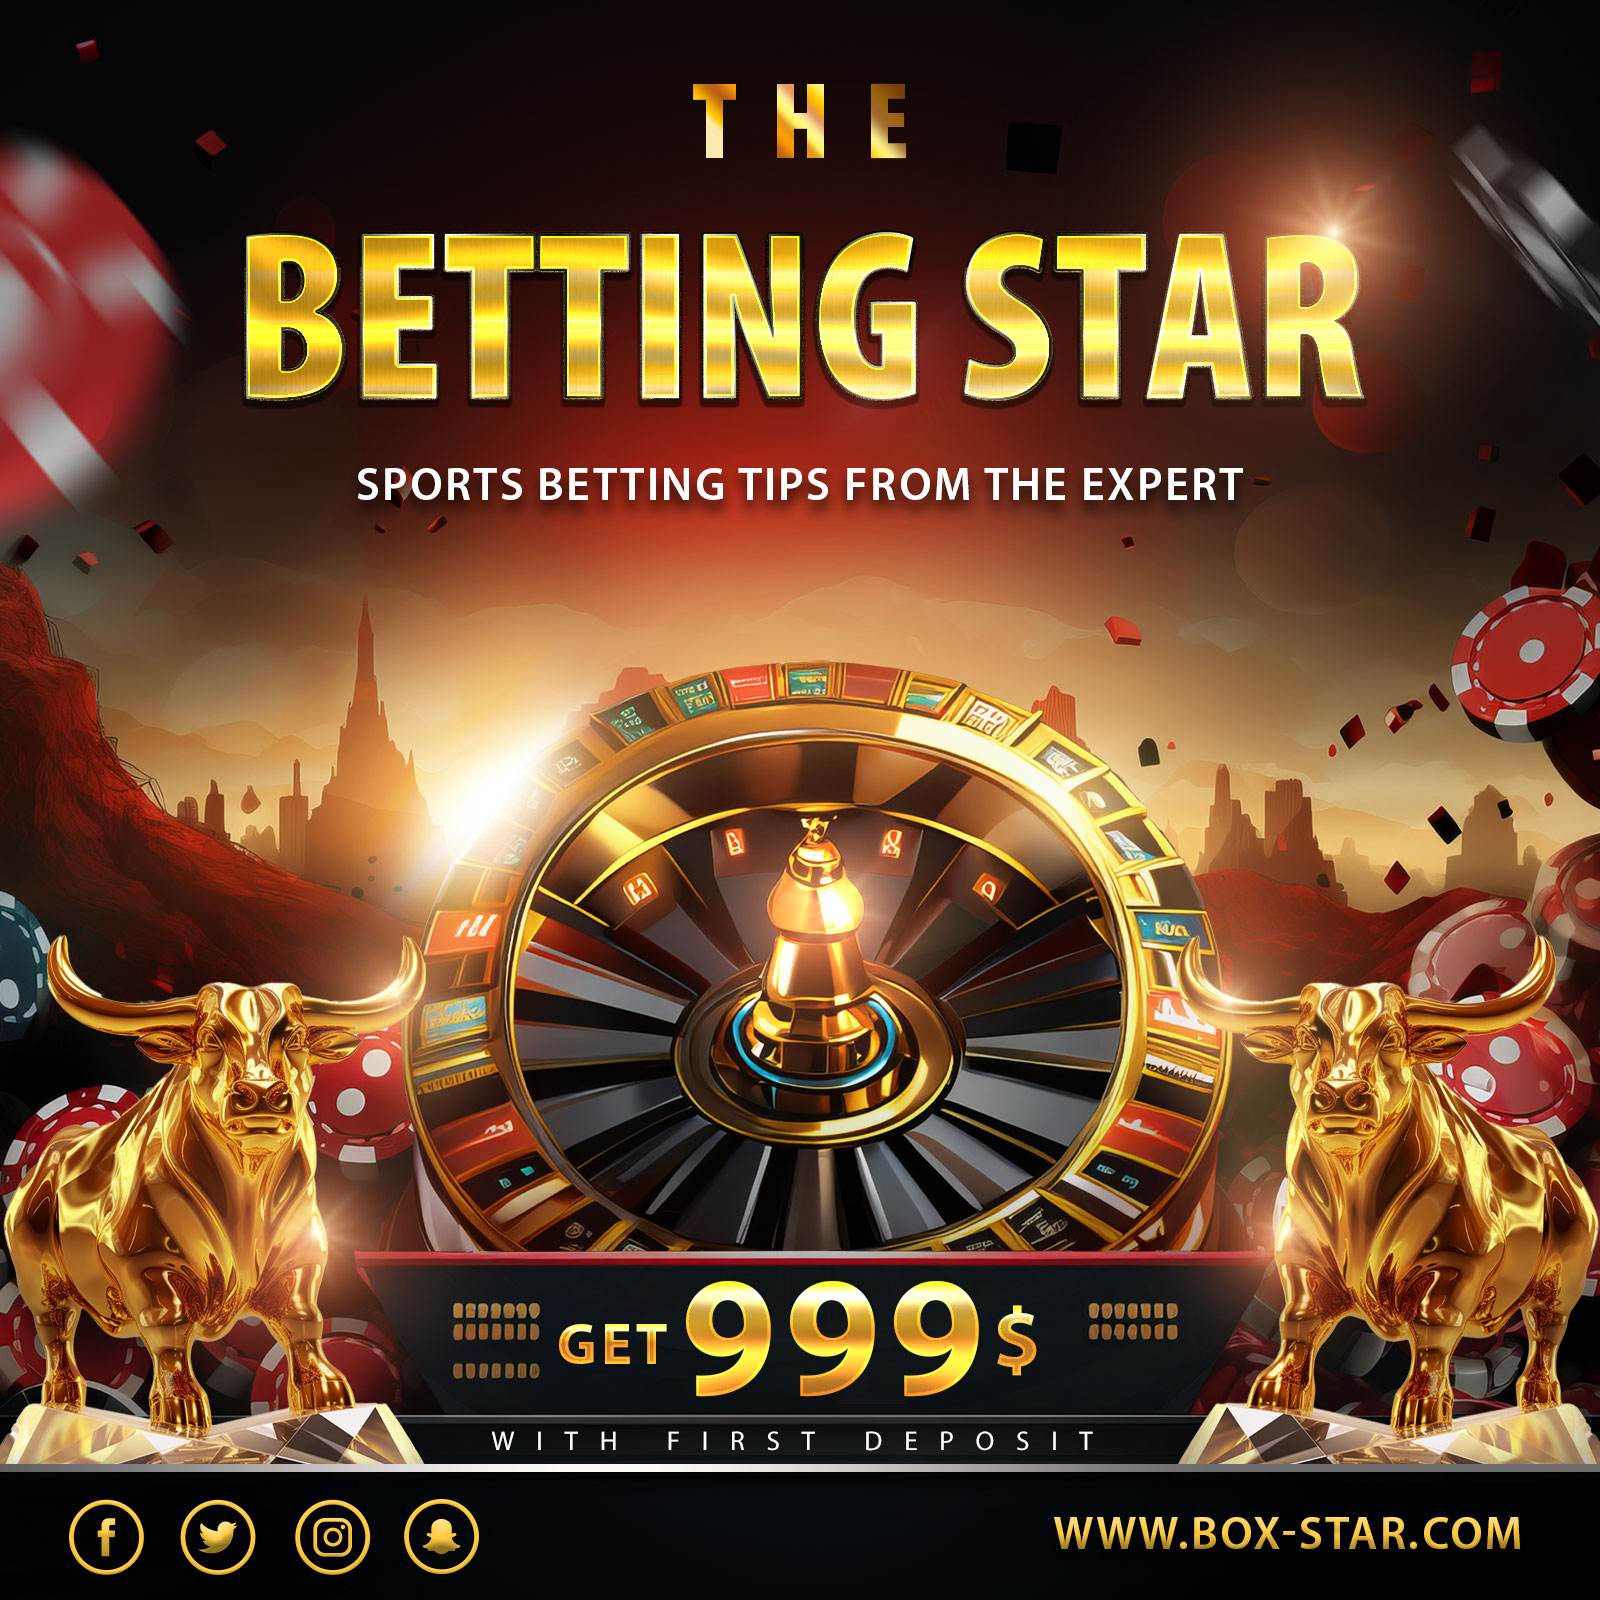 The Betting Star